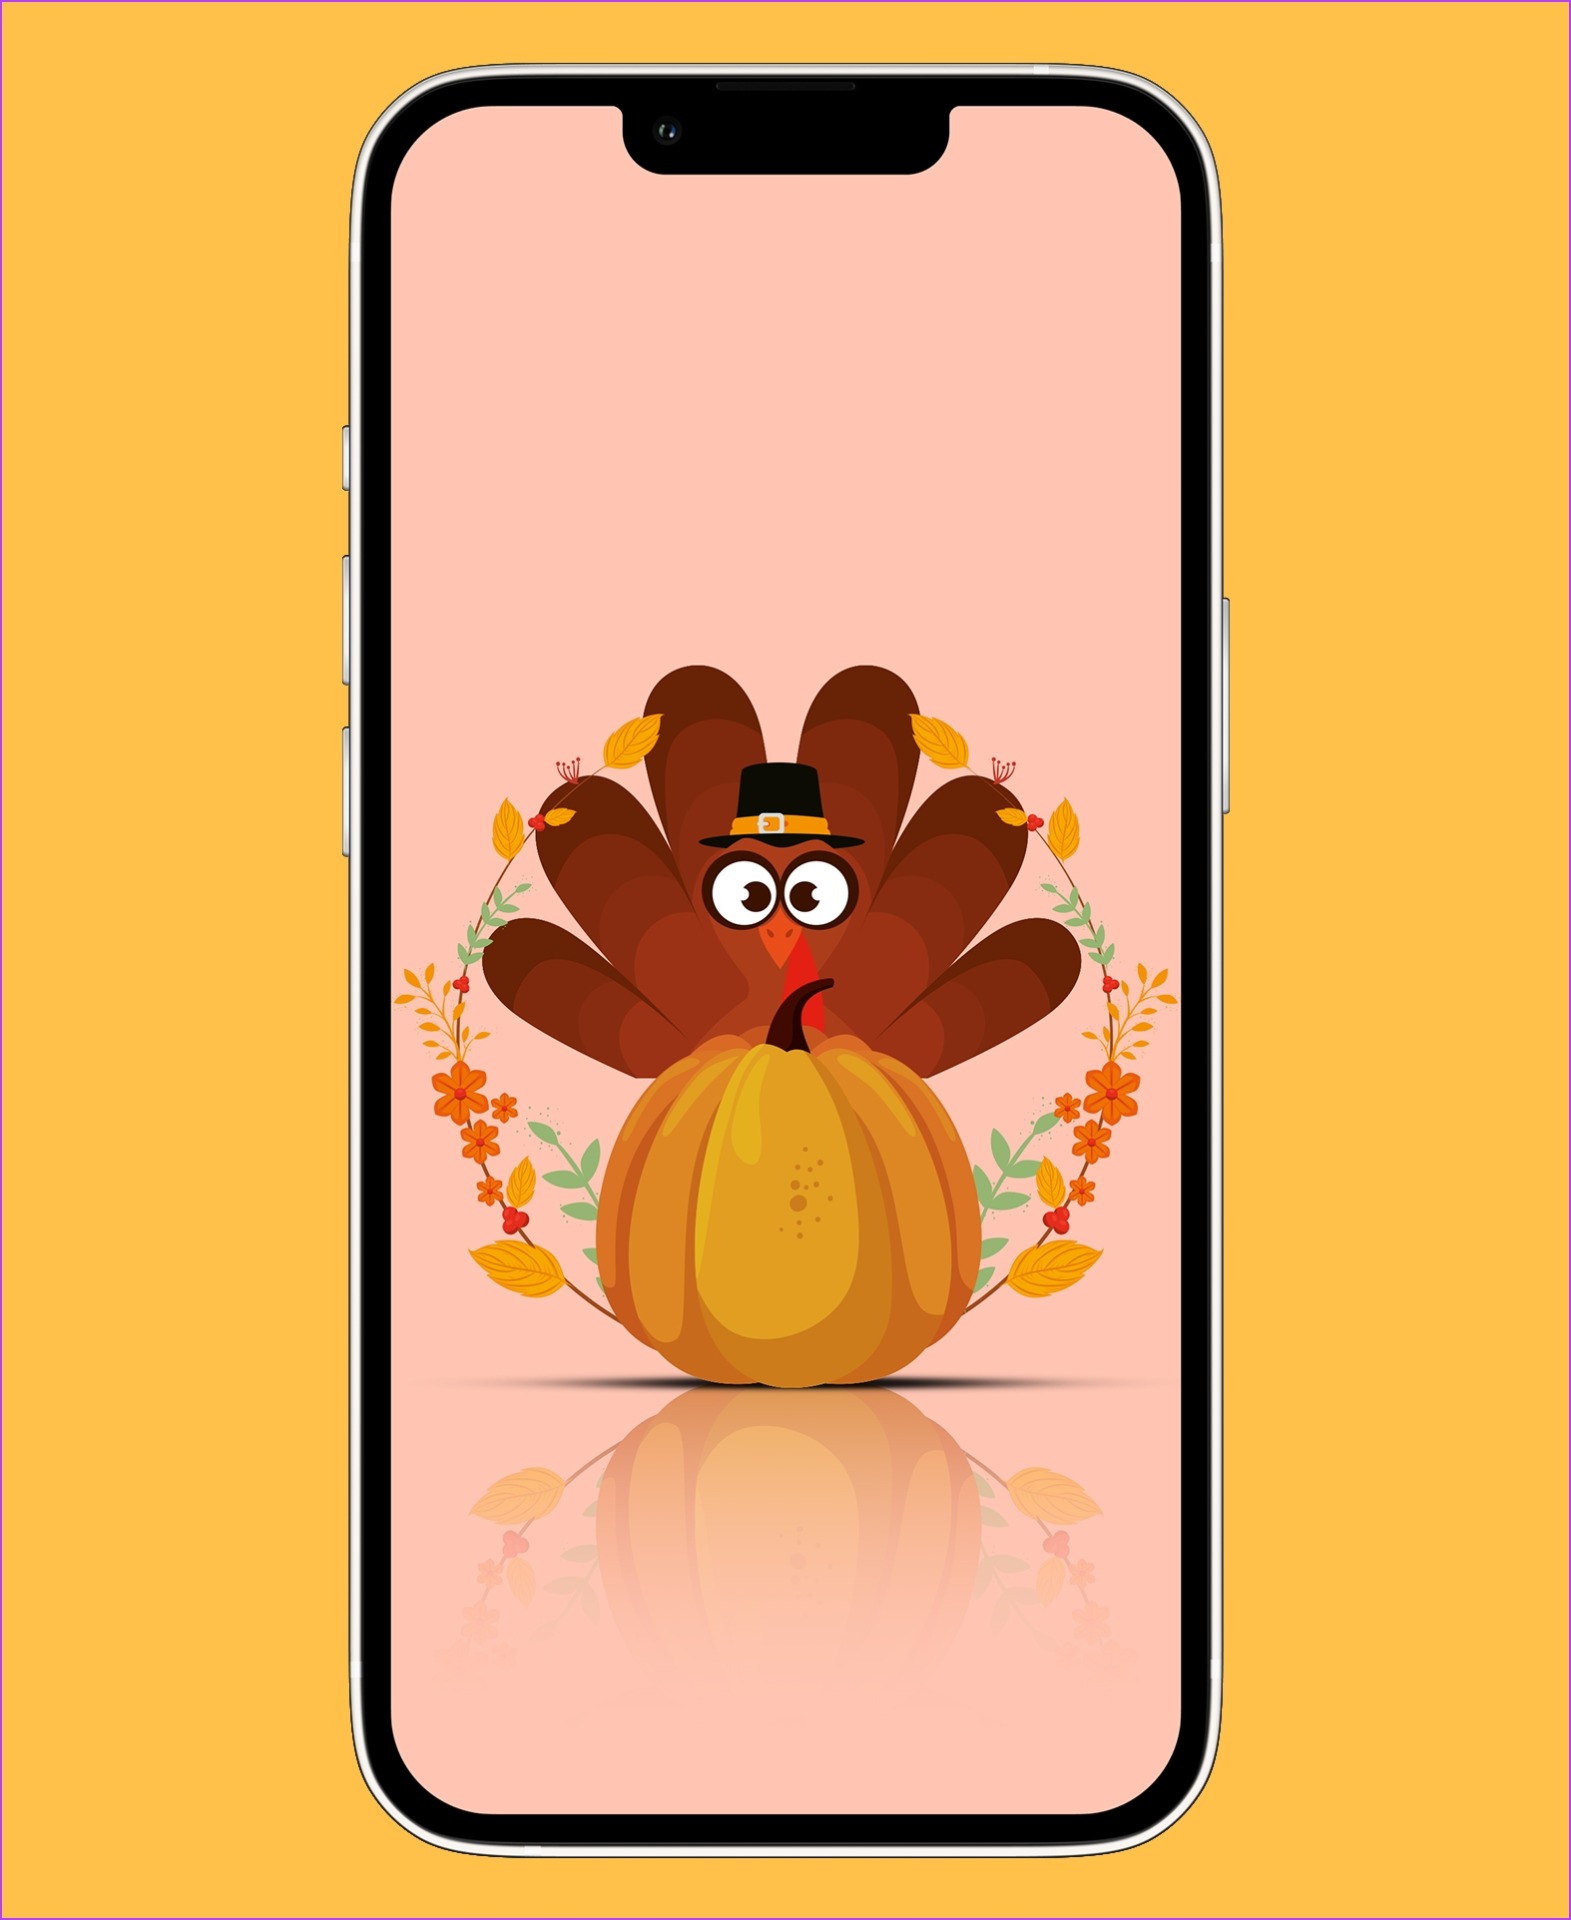 Aggregate more than 58 thanksgiving turkey wallpaper - in.cdgdbentre